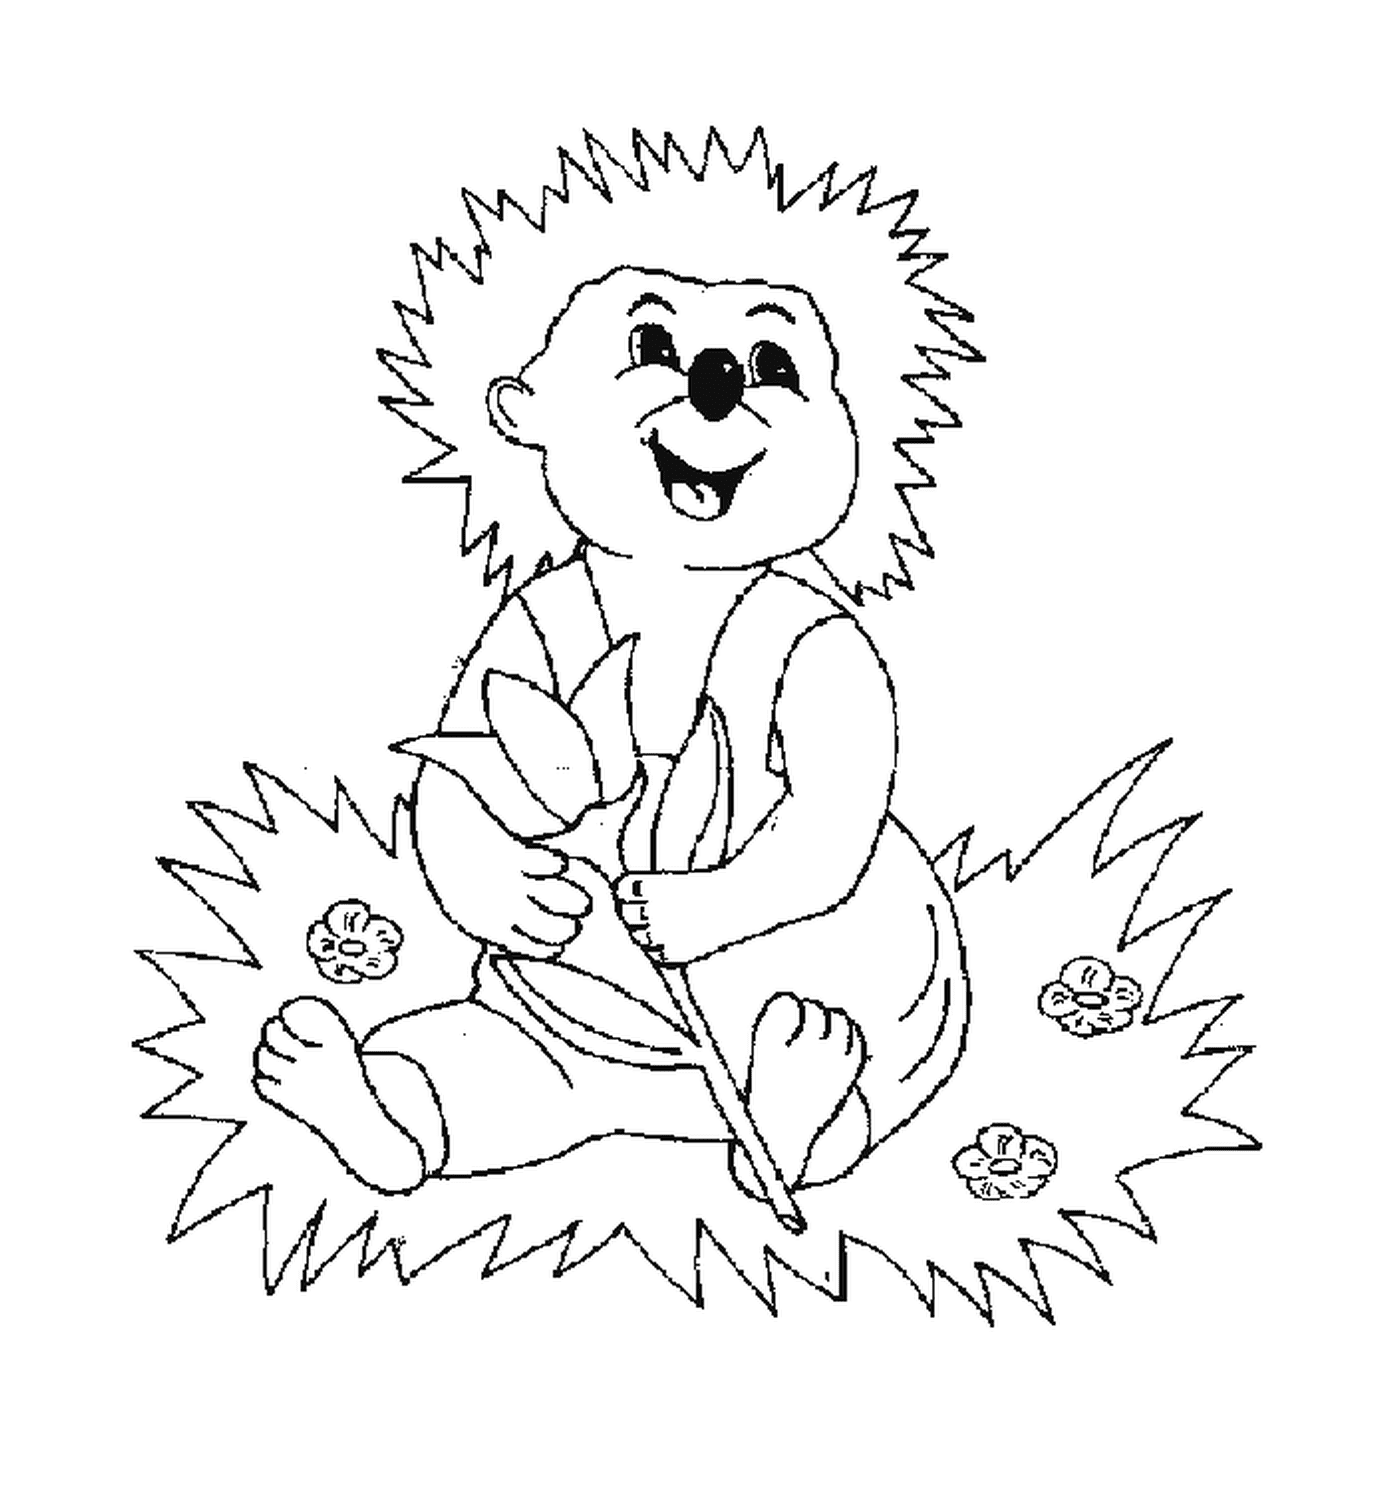  Hedgehog sitting in the grass 